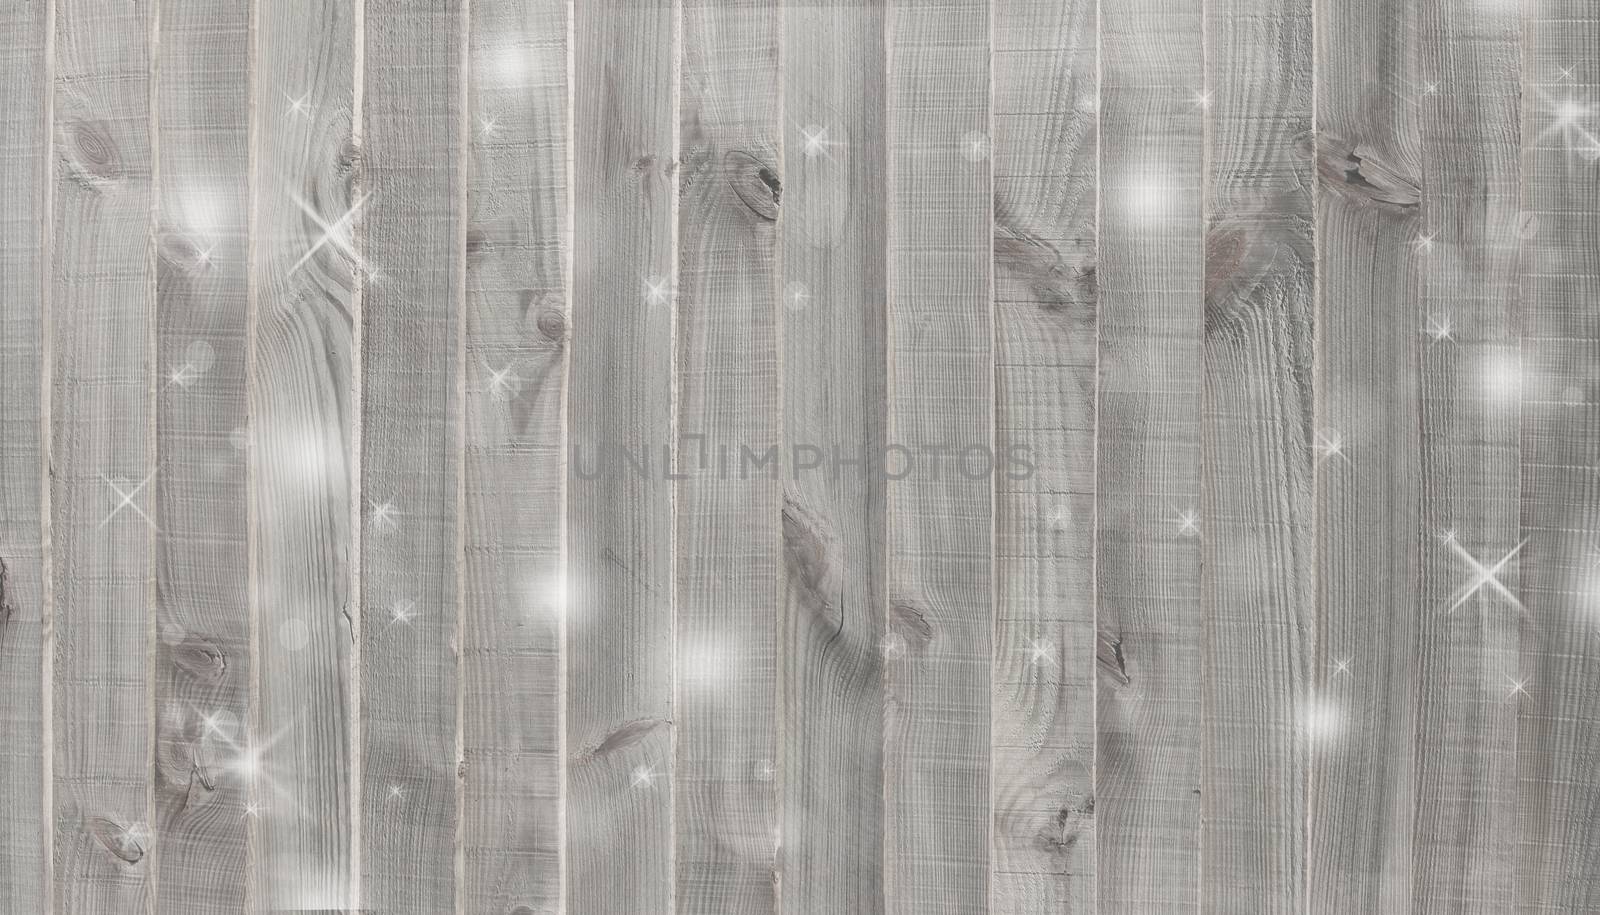 Rustric wooden background for Christmas New Year with snow.